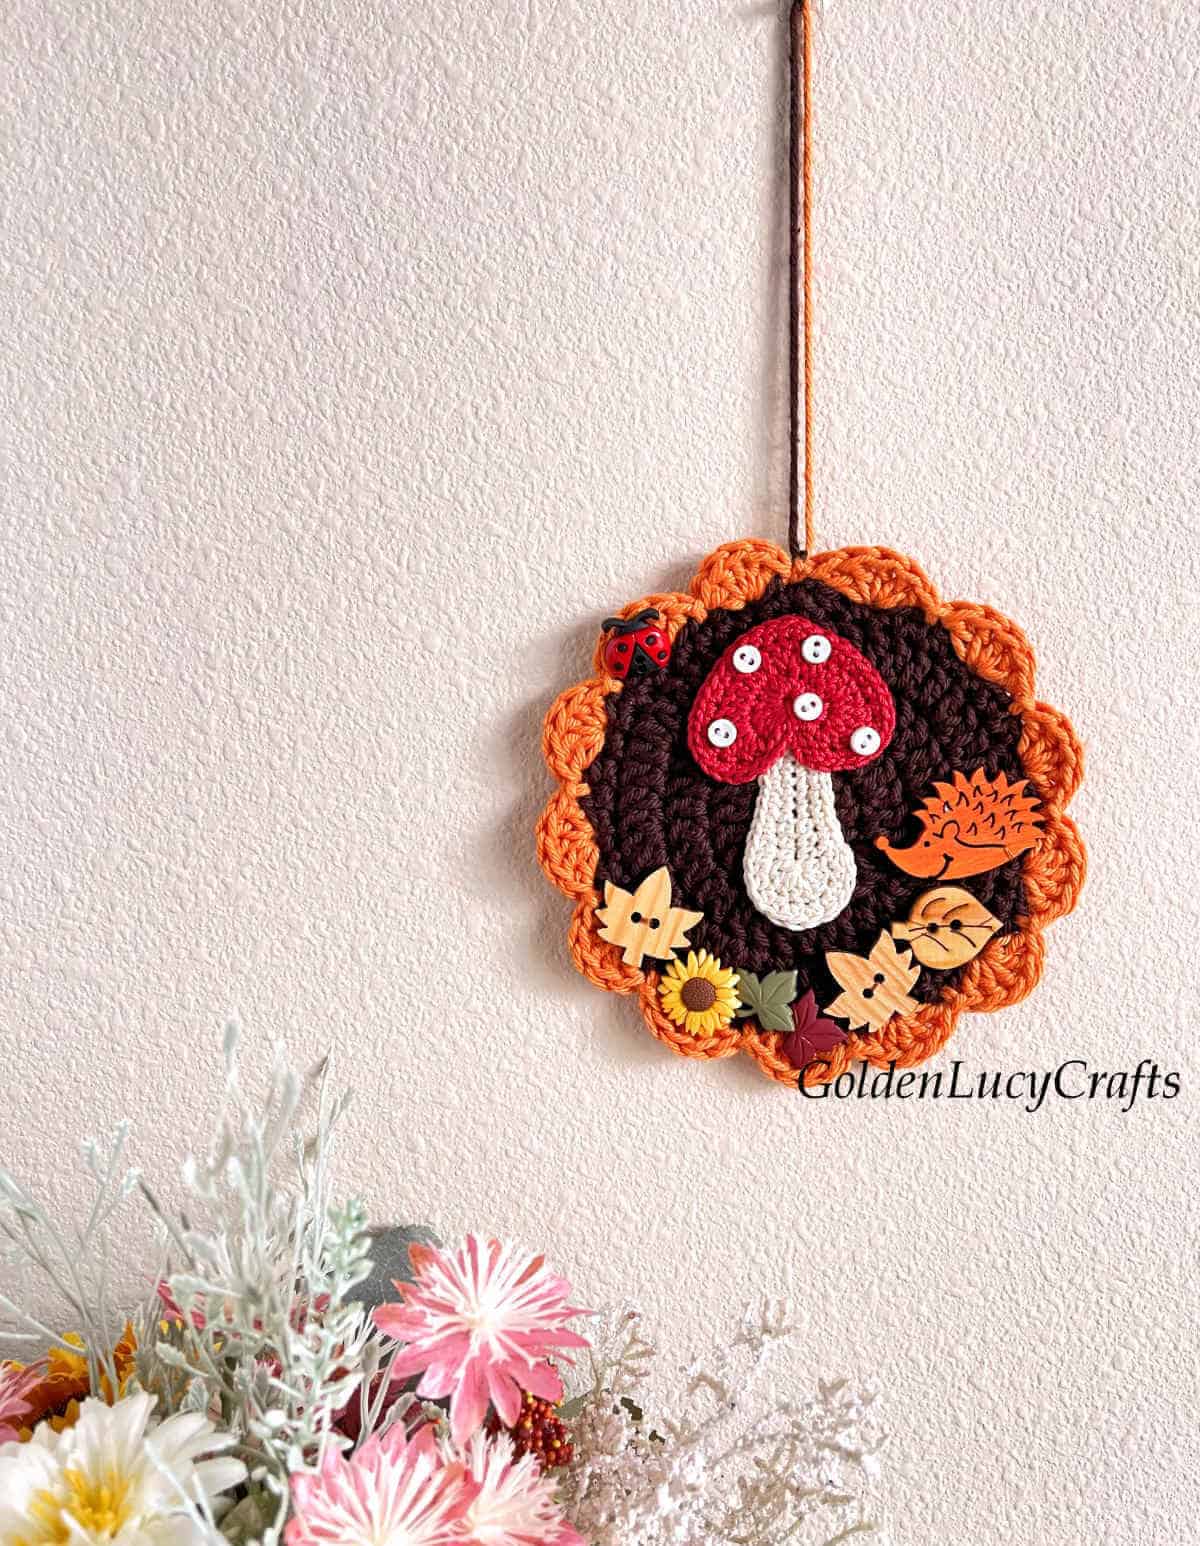 Crocheted Fall themed ornament hanging on the wall.